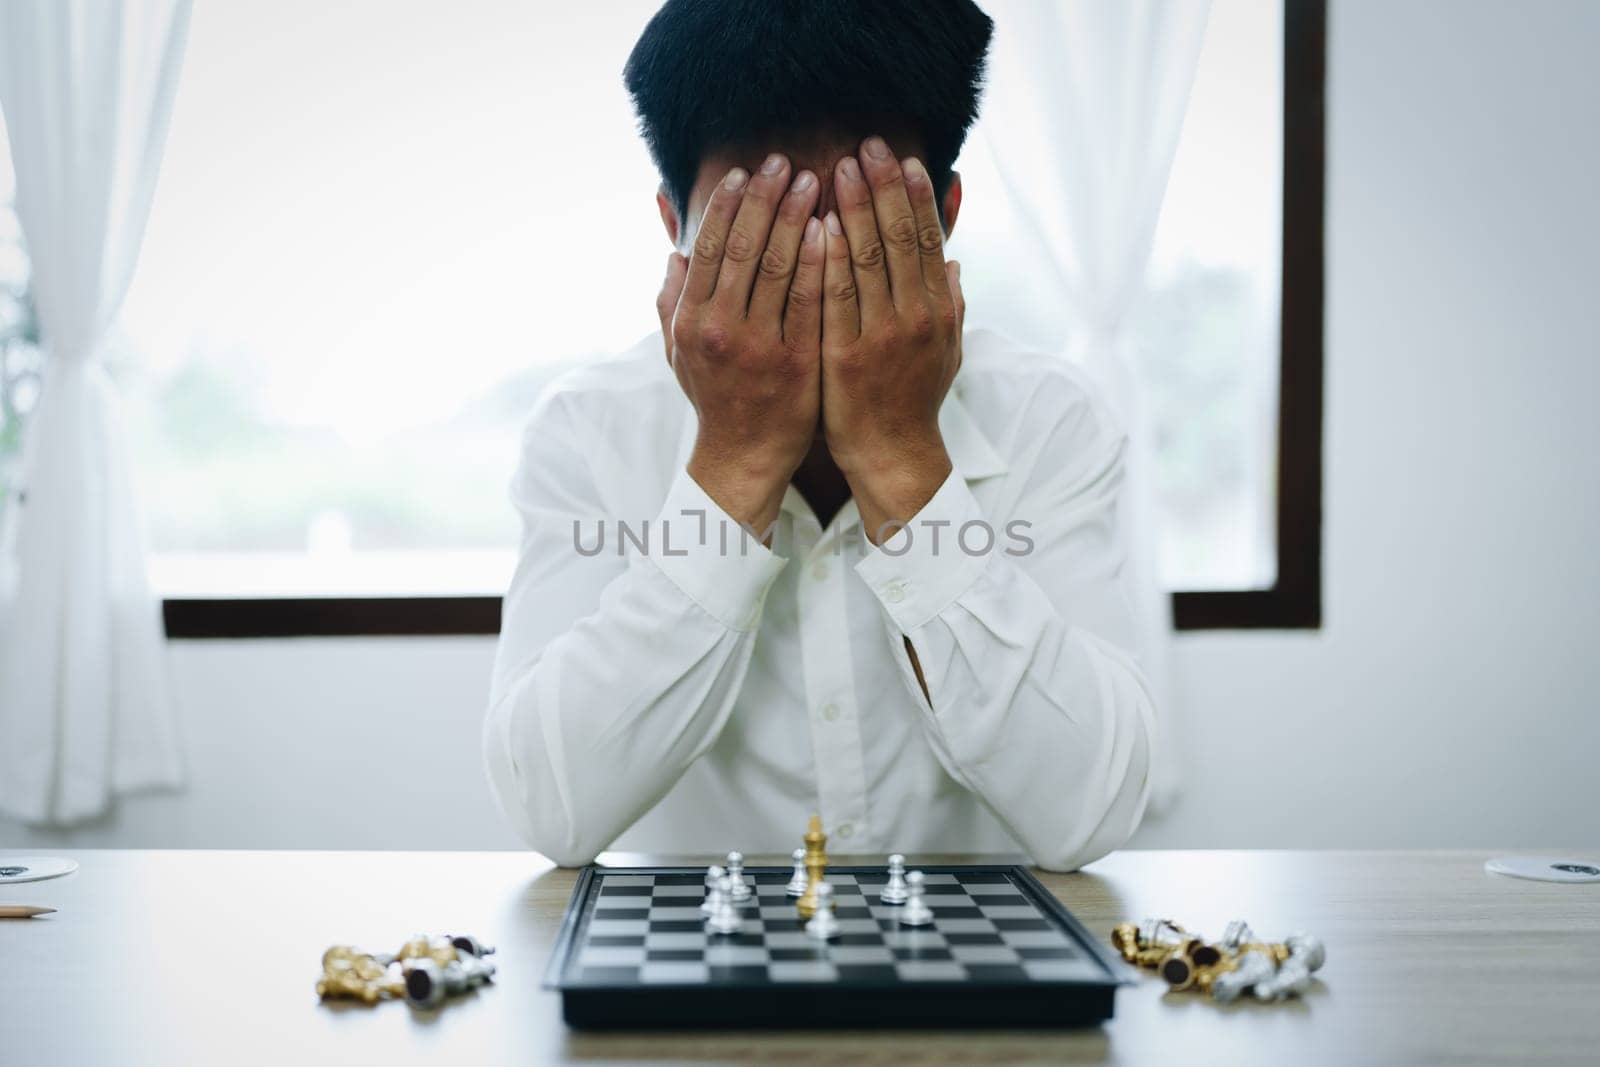 Playing and planning a chess walk, entrepreneurs show defeat in planning their financial affairs by Manastrong